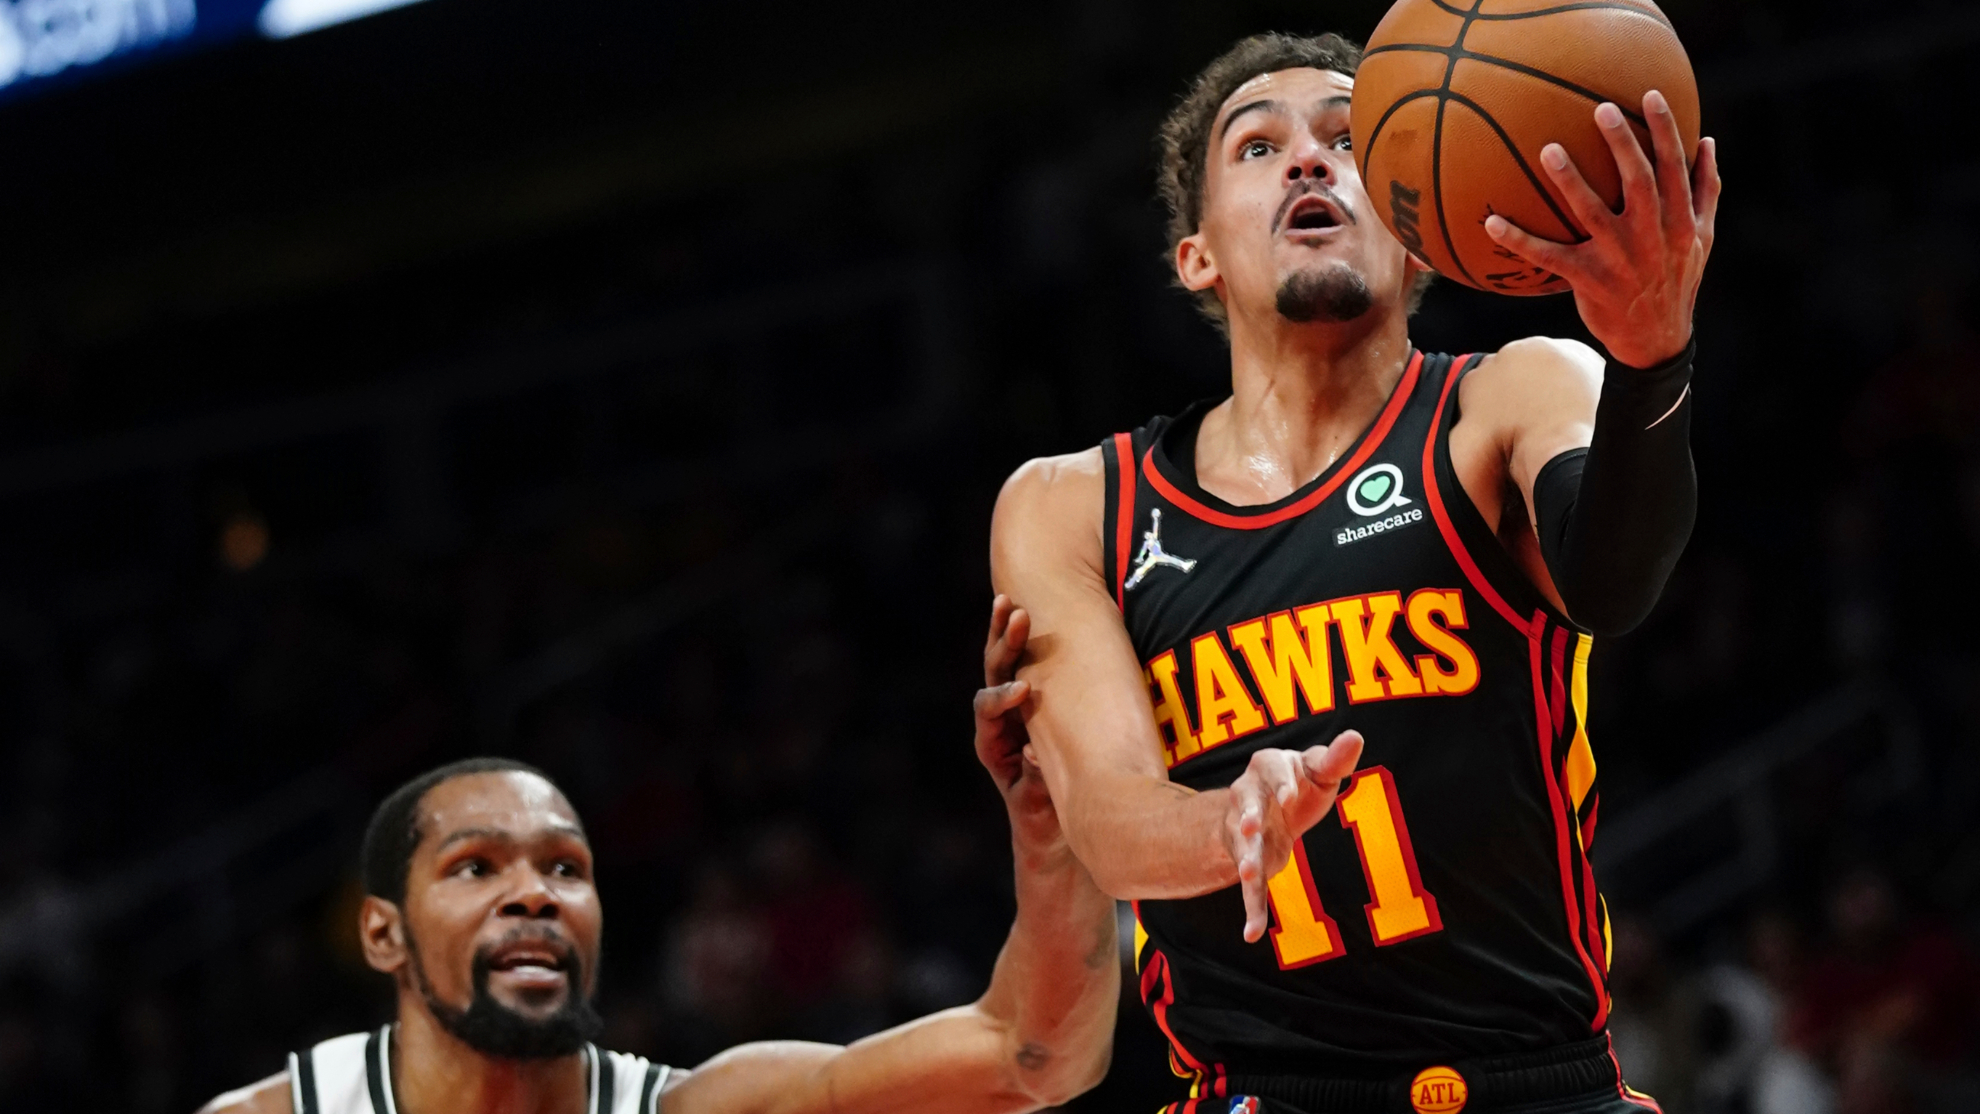 NBA News: Is Trae Young playing tonight vs 76ers? Contest against Joel Embiid and co. could witness Hawks play without best player